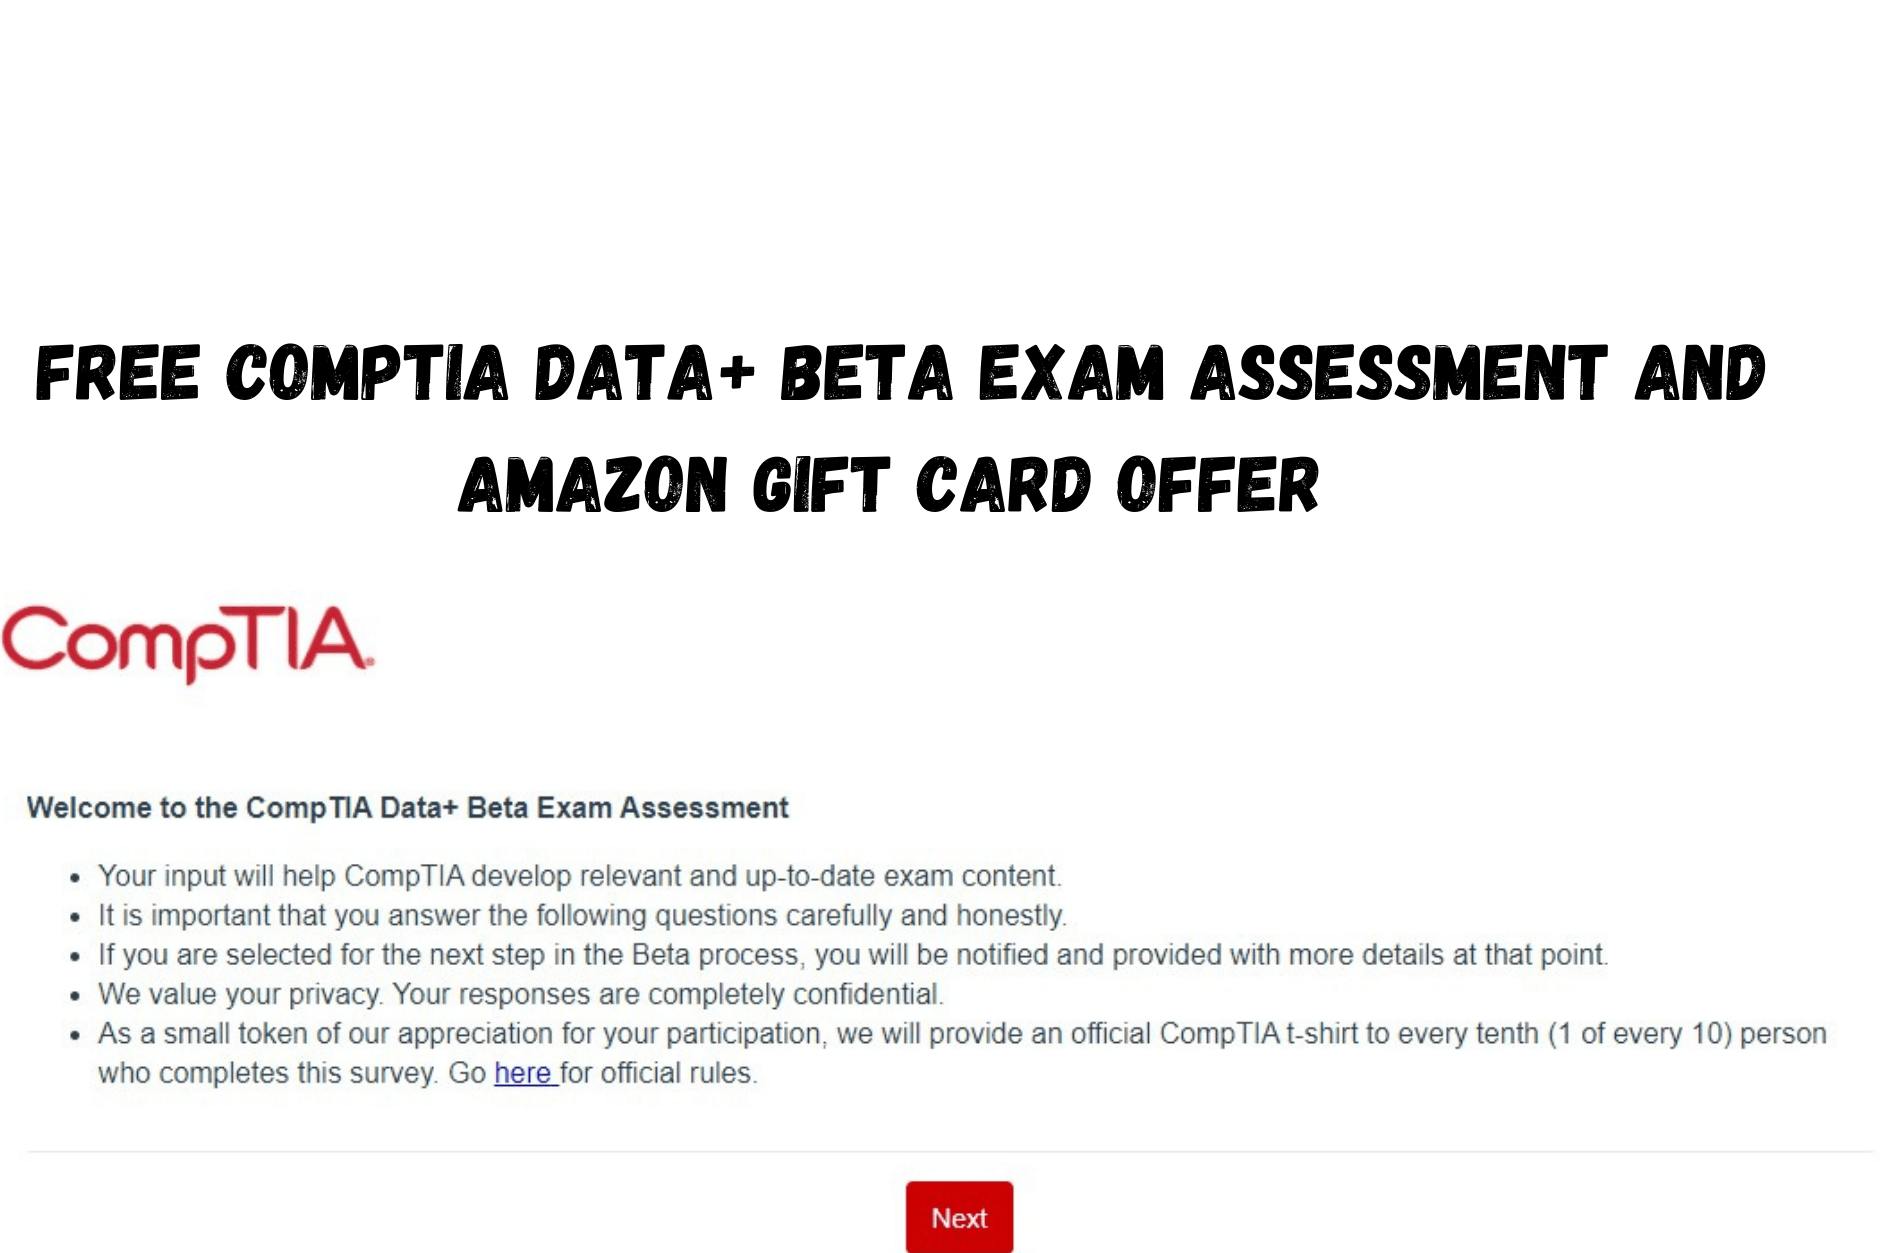 Free CompTIA Data+ Beta Exam Assessment and Amazon gift card offer